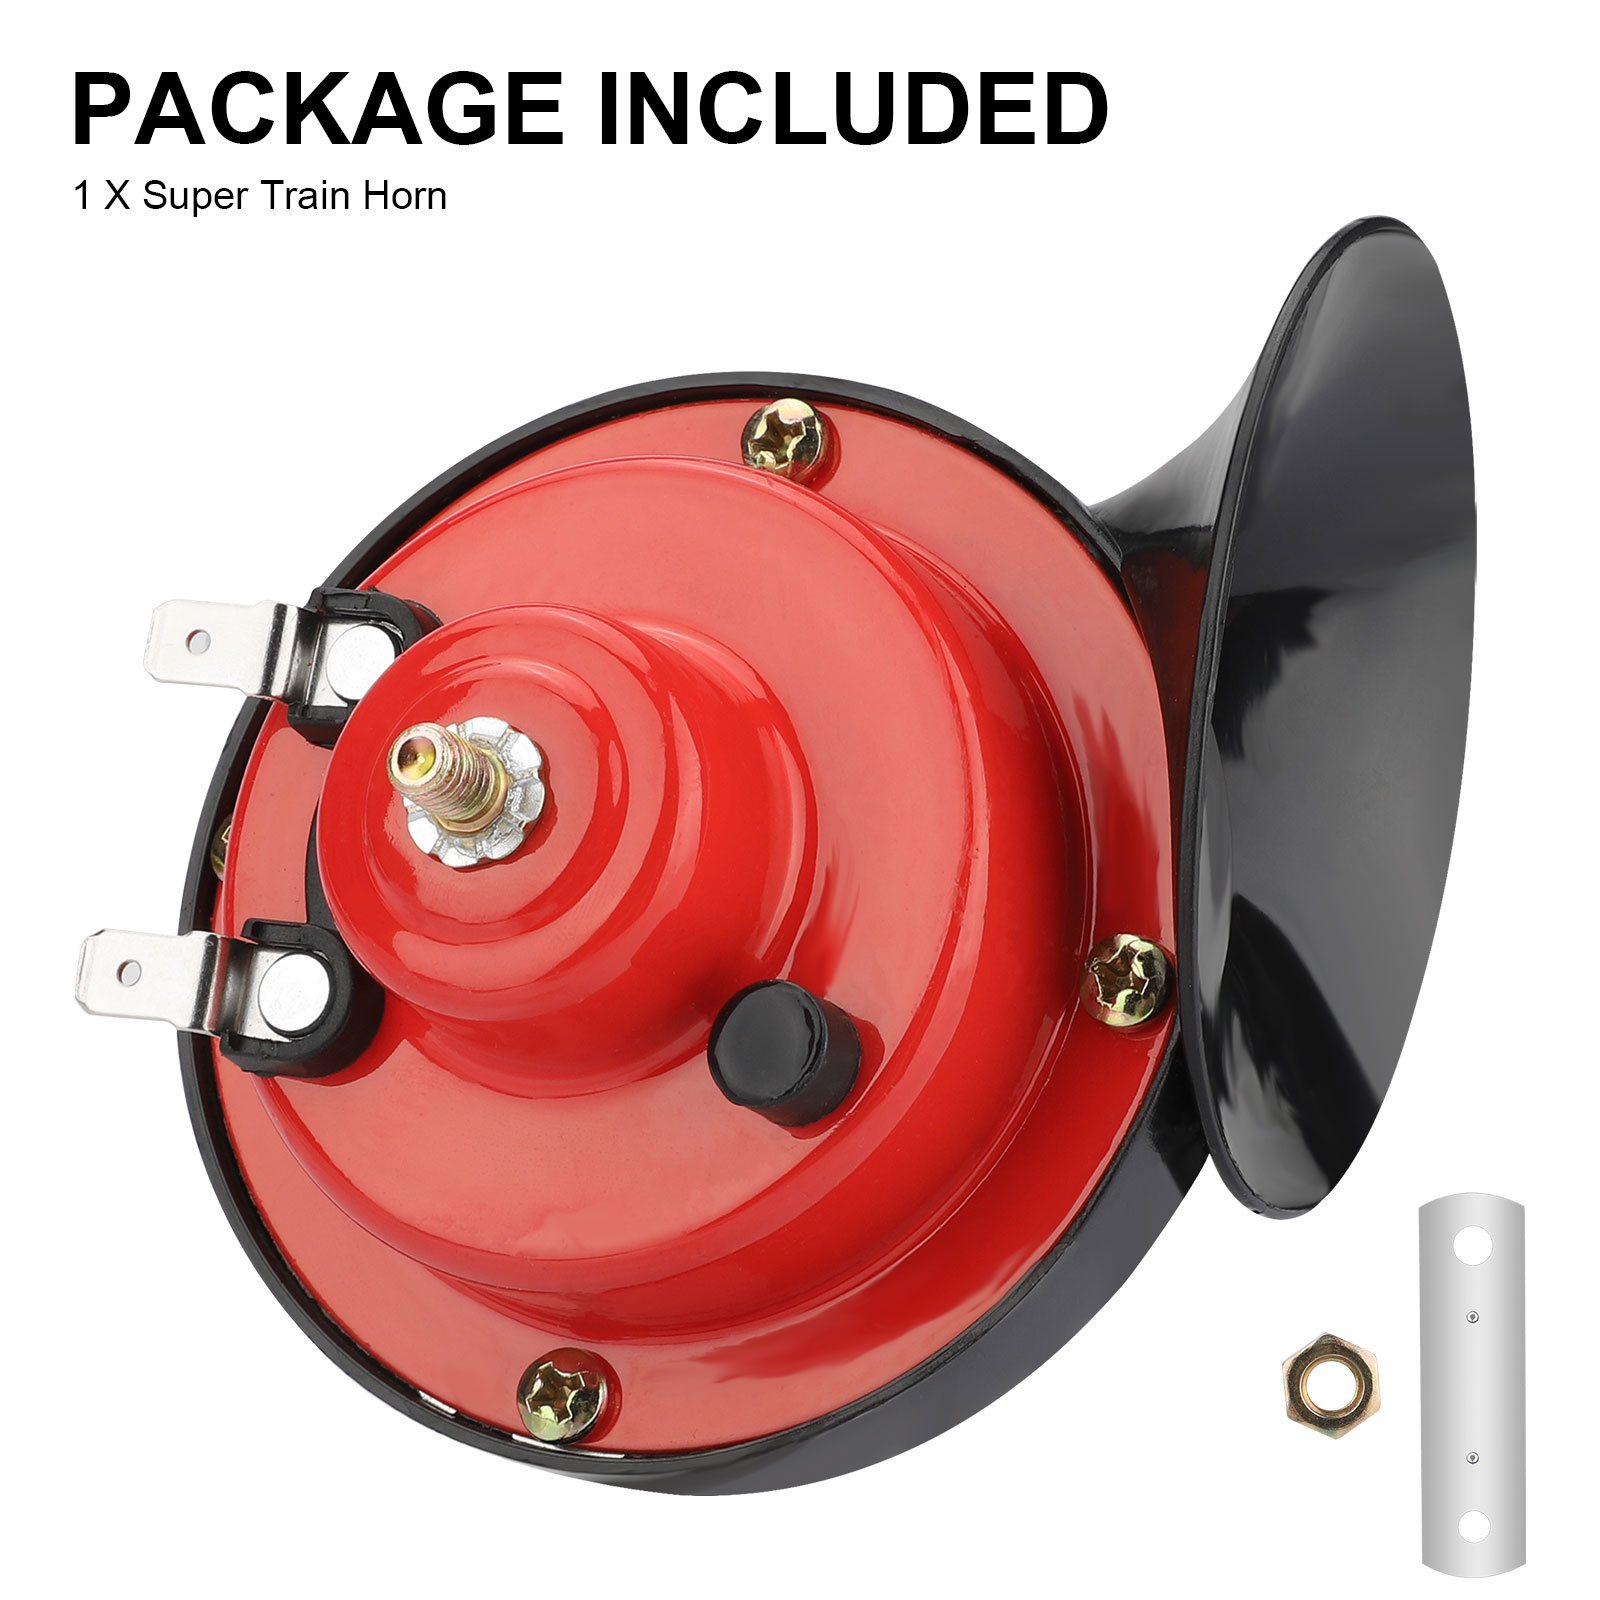 12V 300DB Loud Train Horn Waterproof for Motorcycles Car Truck SUV Boat Red | eBay